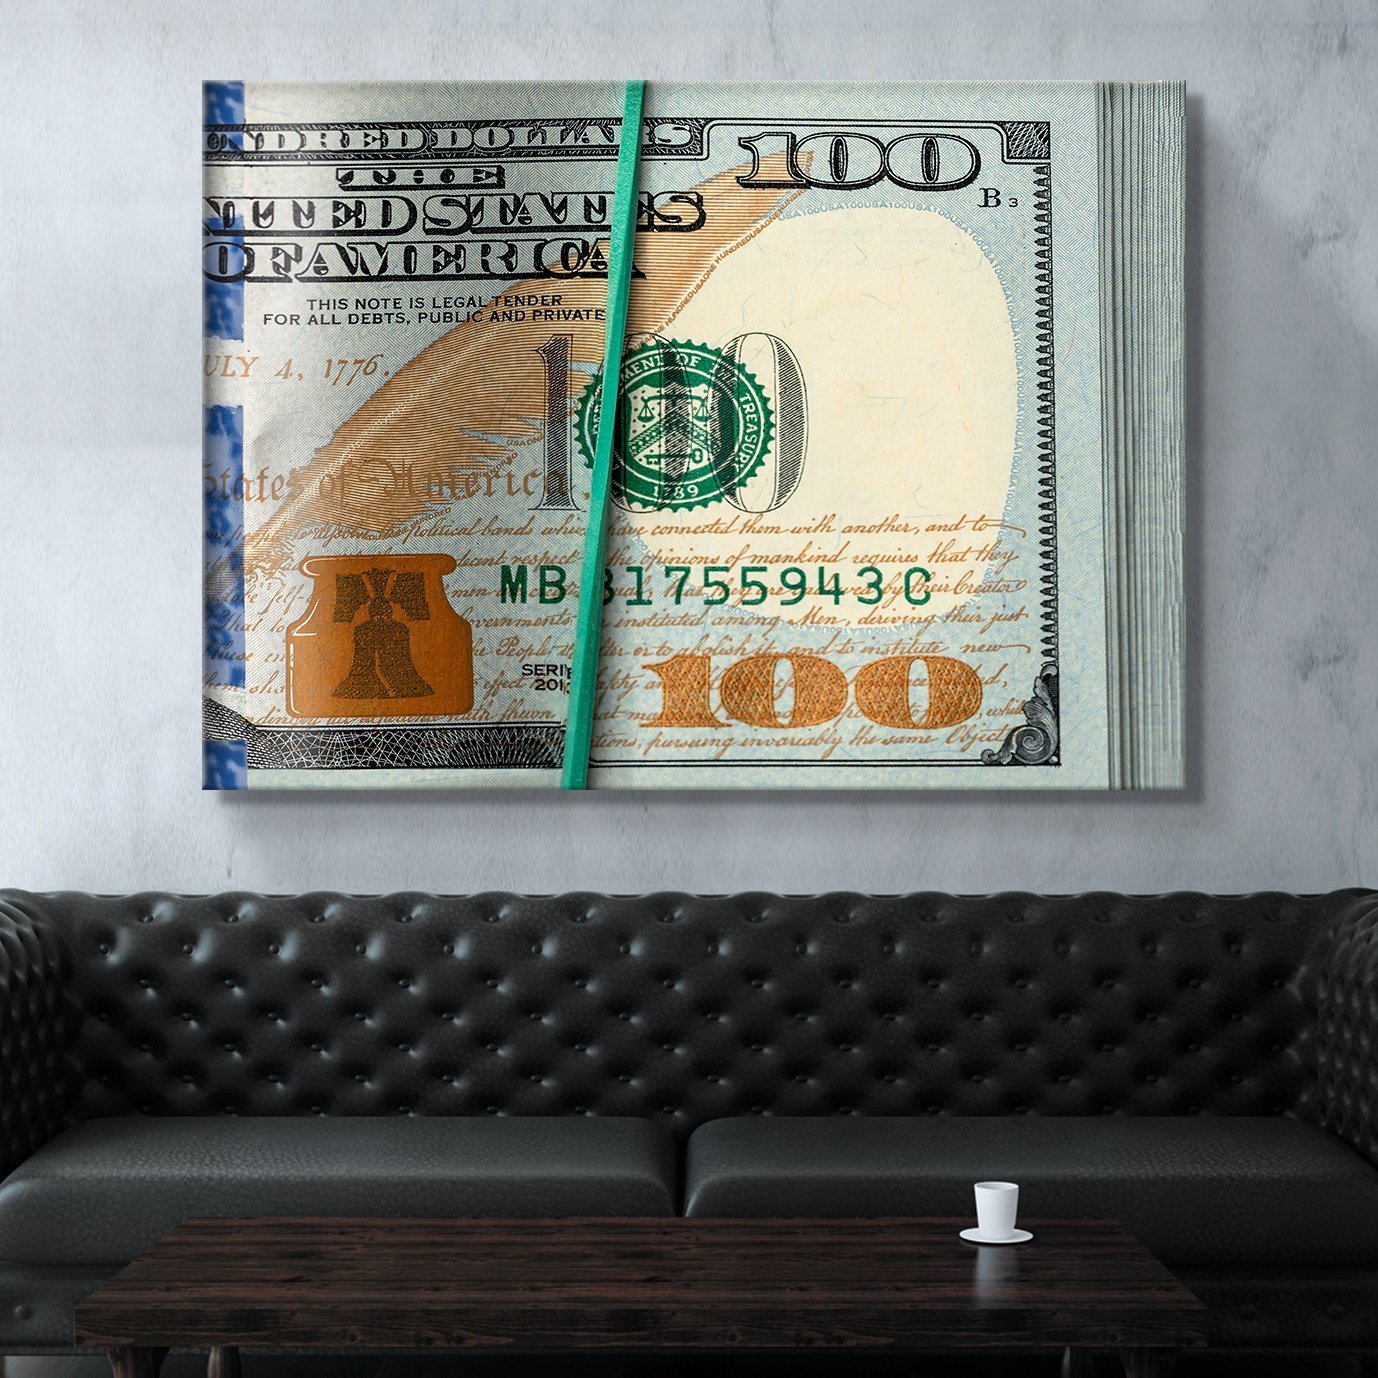 Awesome "Rubberband Racks" Dollar Canvas - USTAD HOME